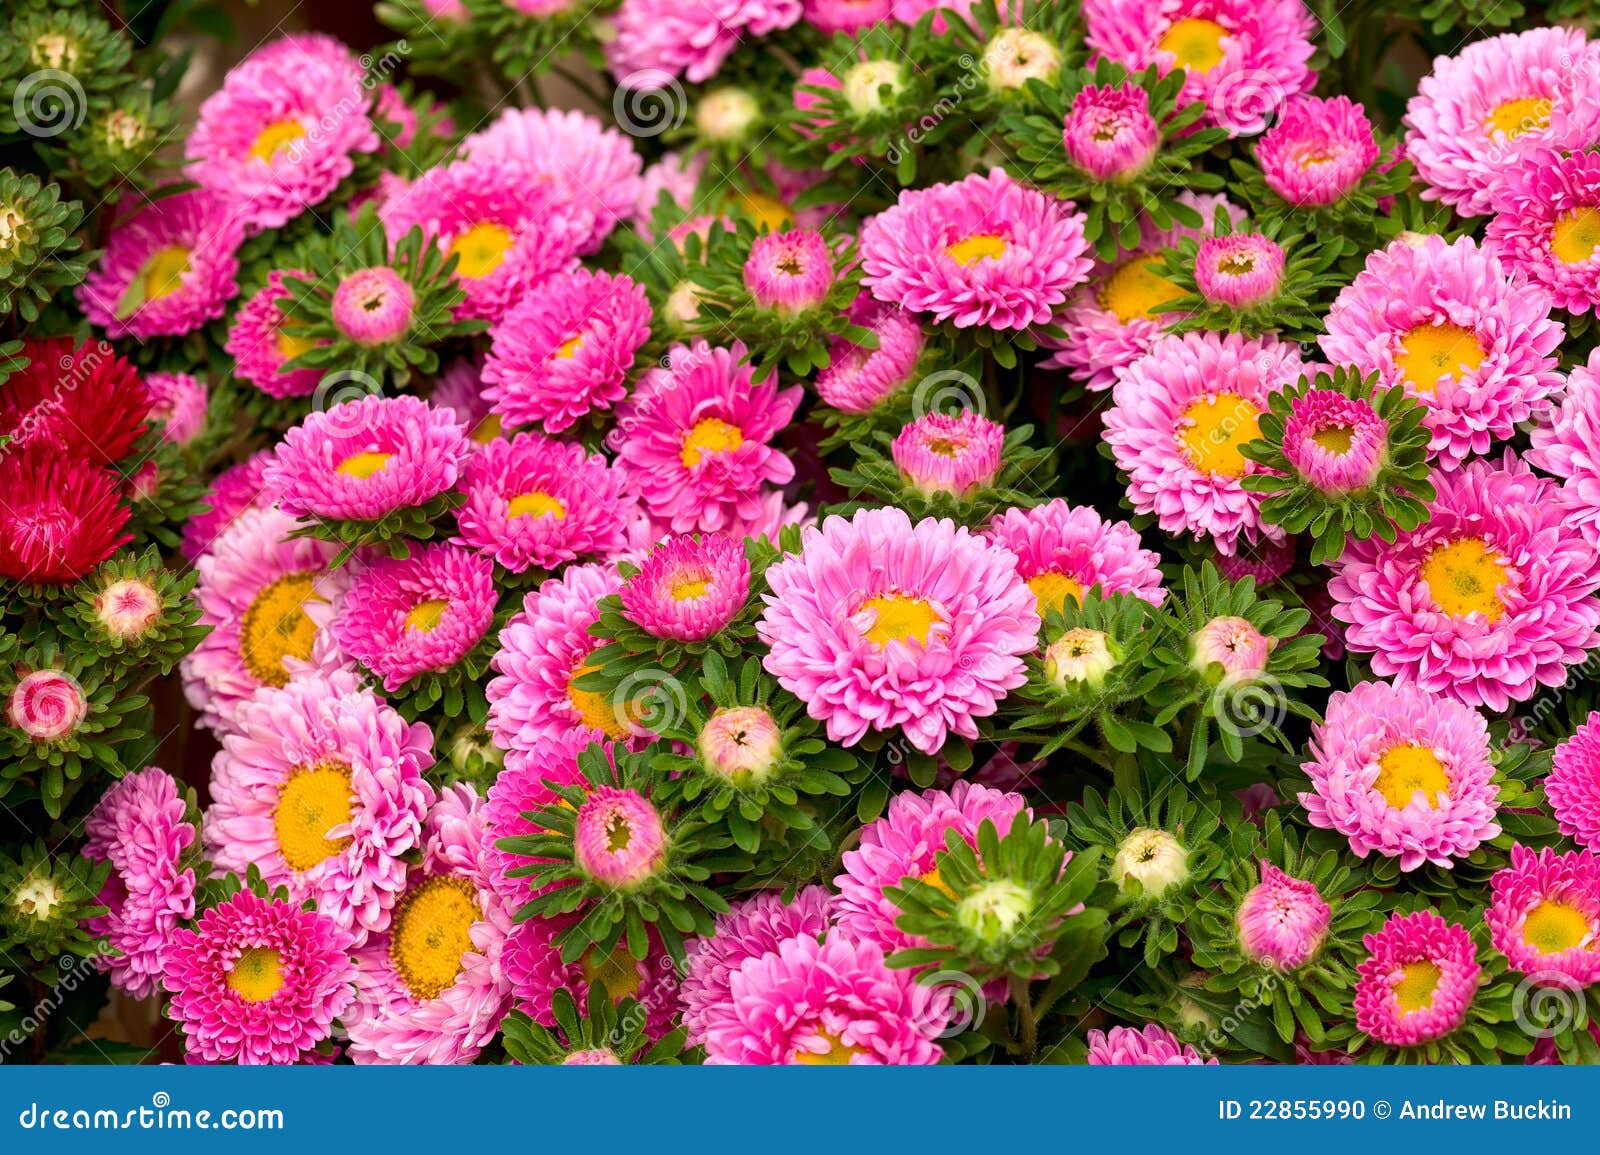 Background of different color Flowers.